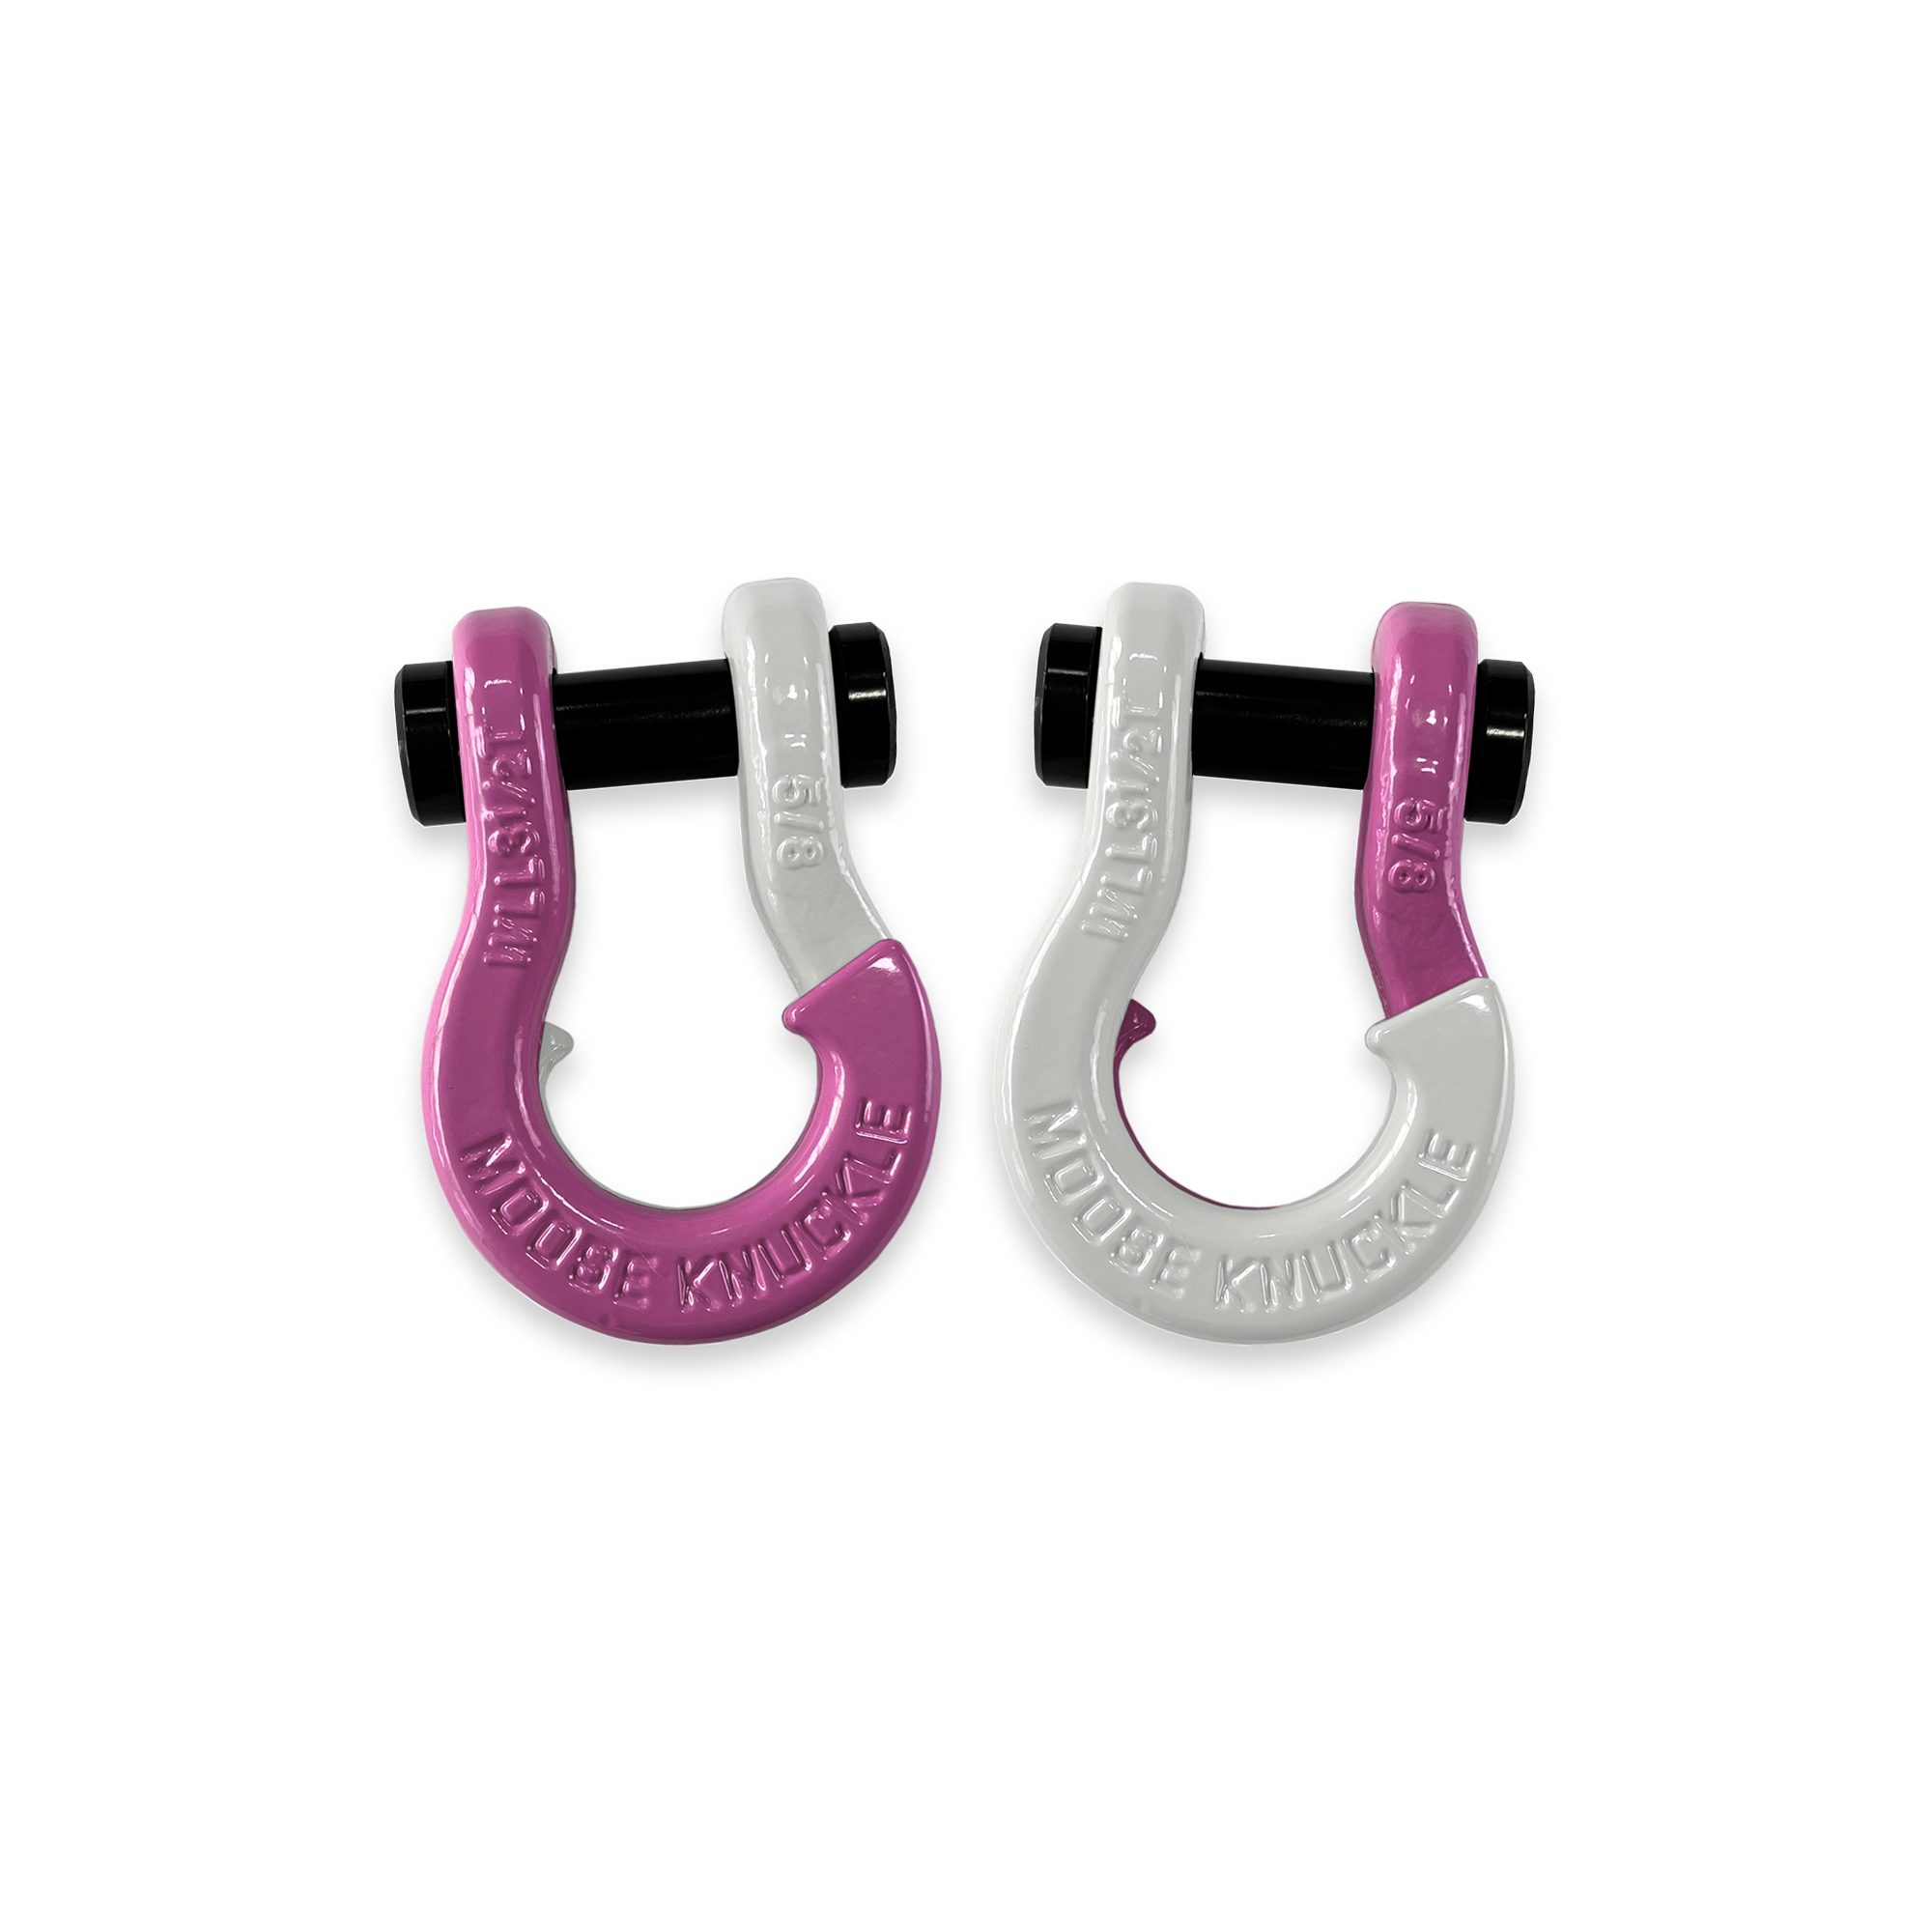 Moose Knuckle Offroad, 5/8 Split Shackle Pretty Pink / Pure White, Working Load Limit 7000 lb, Model FN000025-134